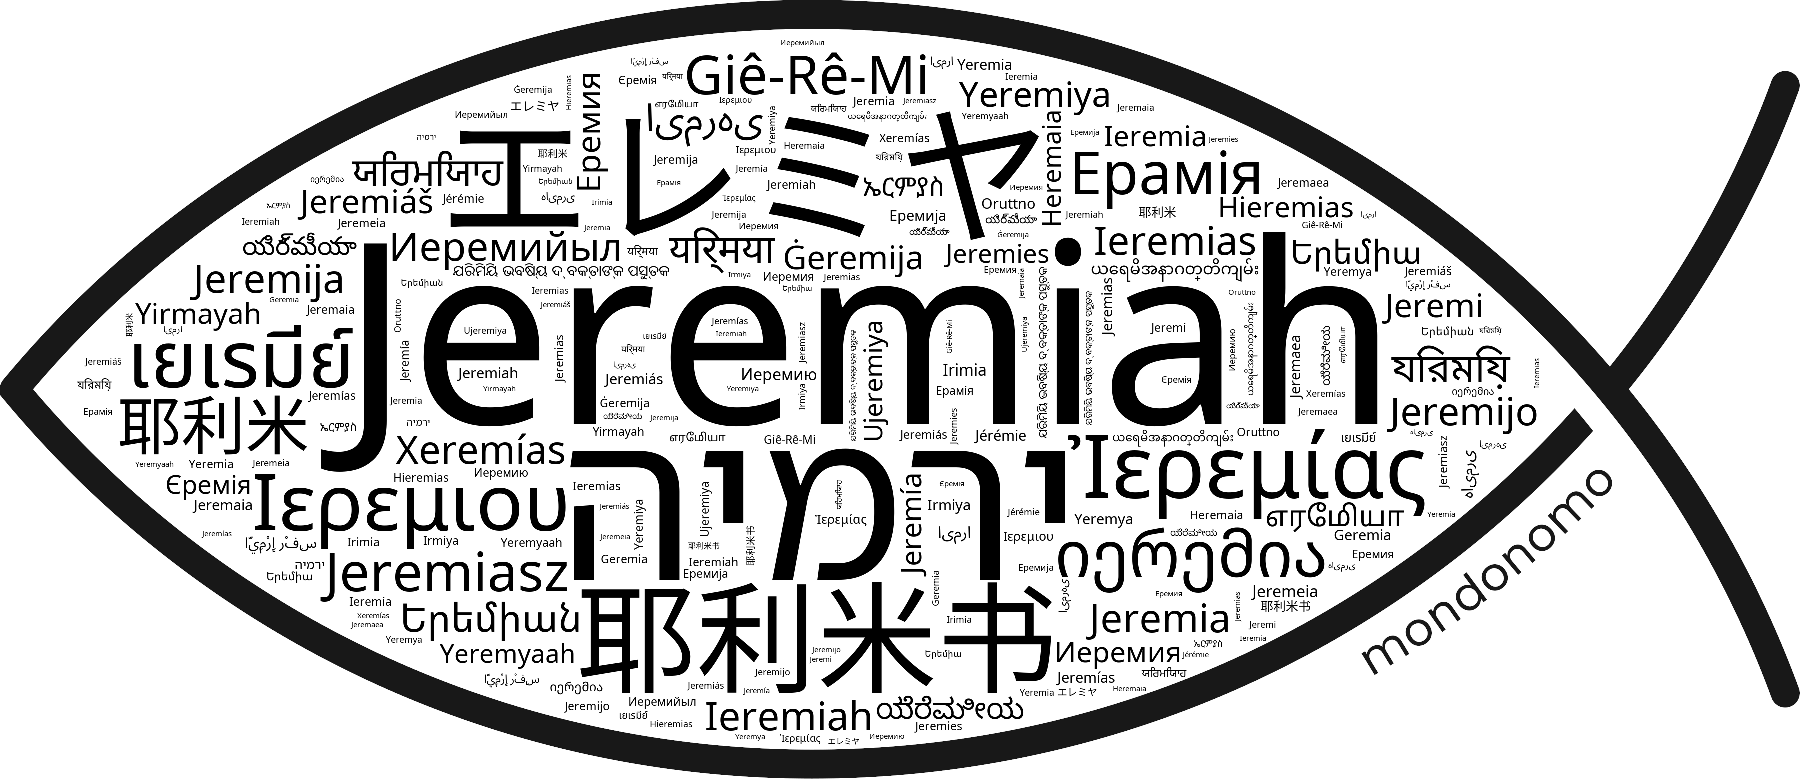 Name Jeremiah in the world's Bibles